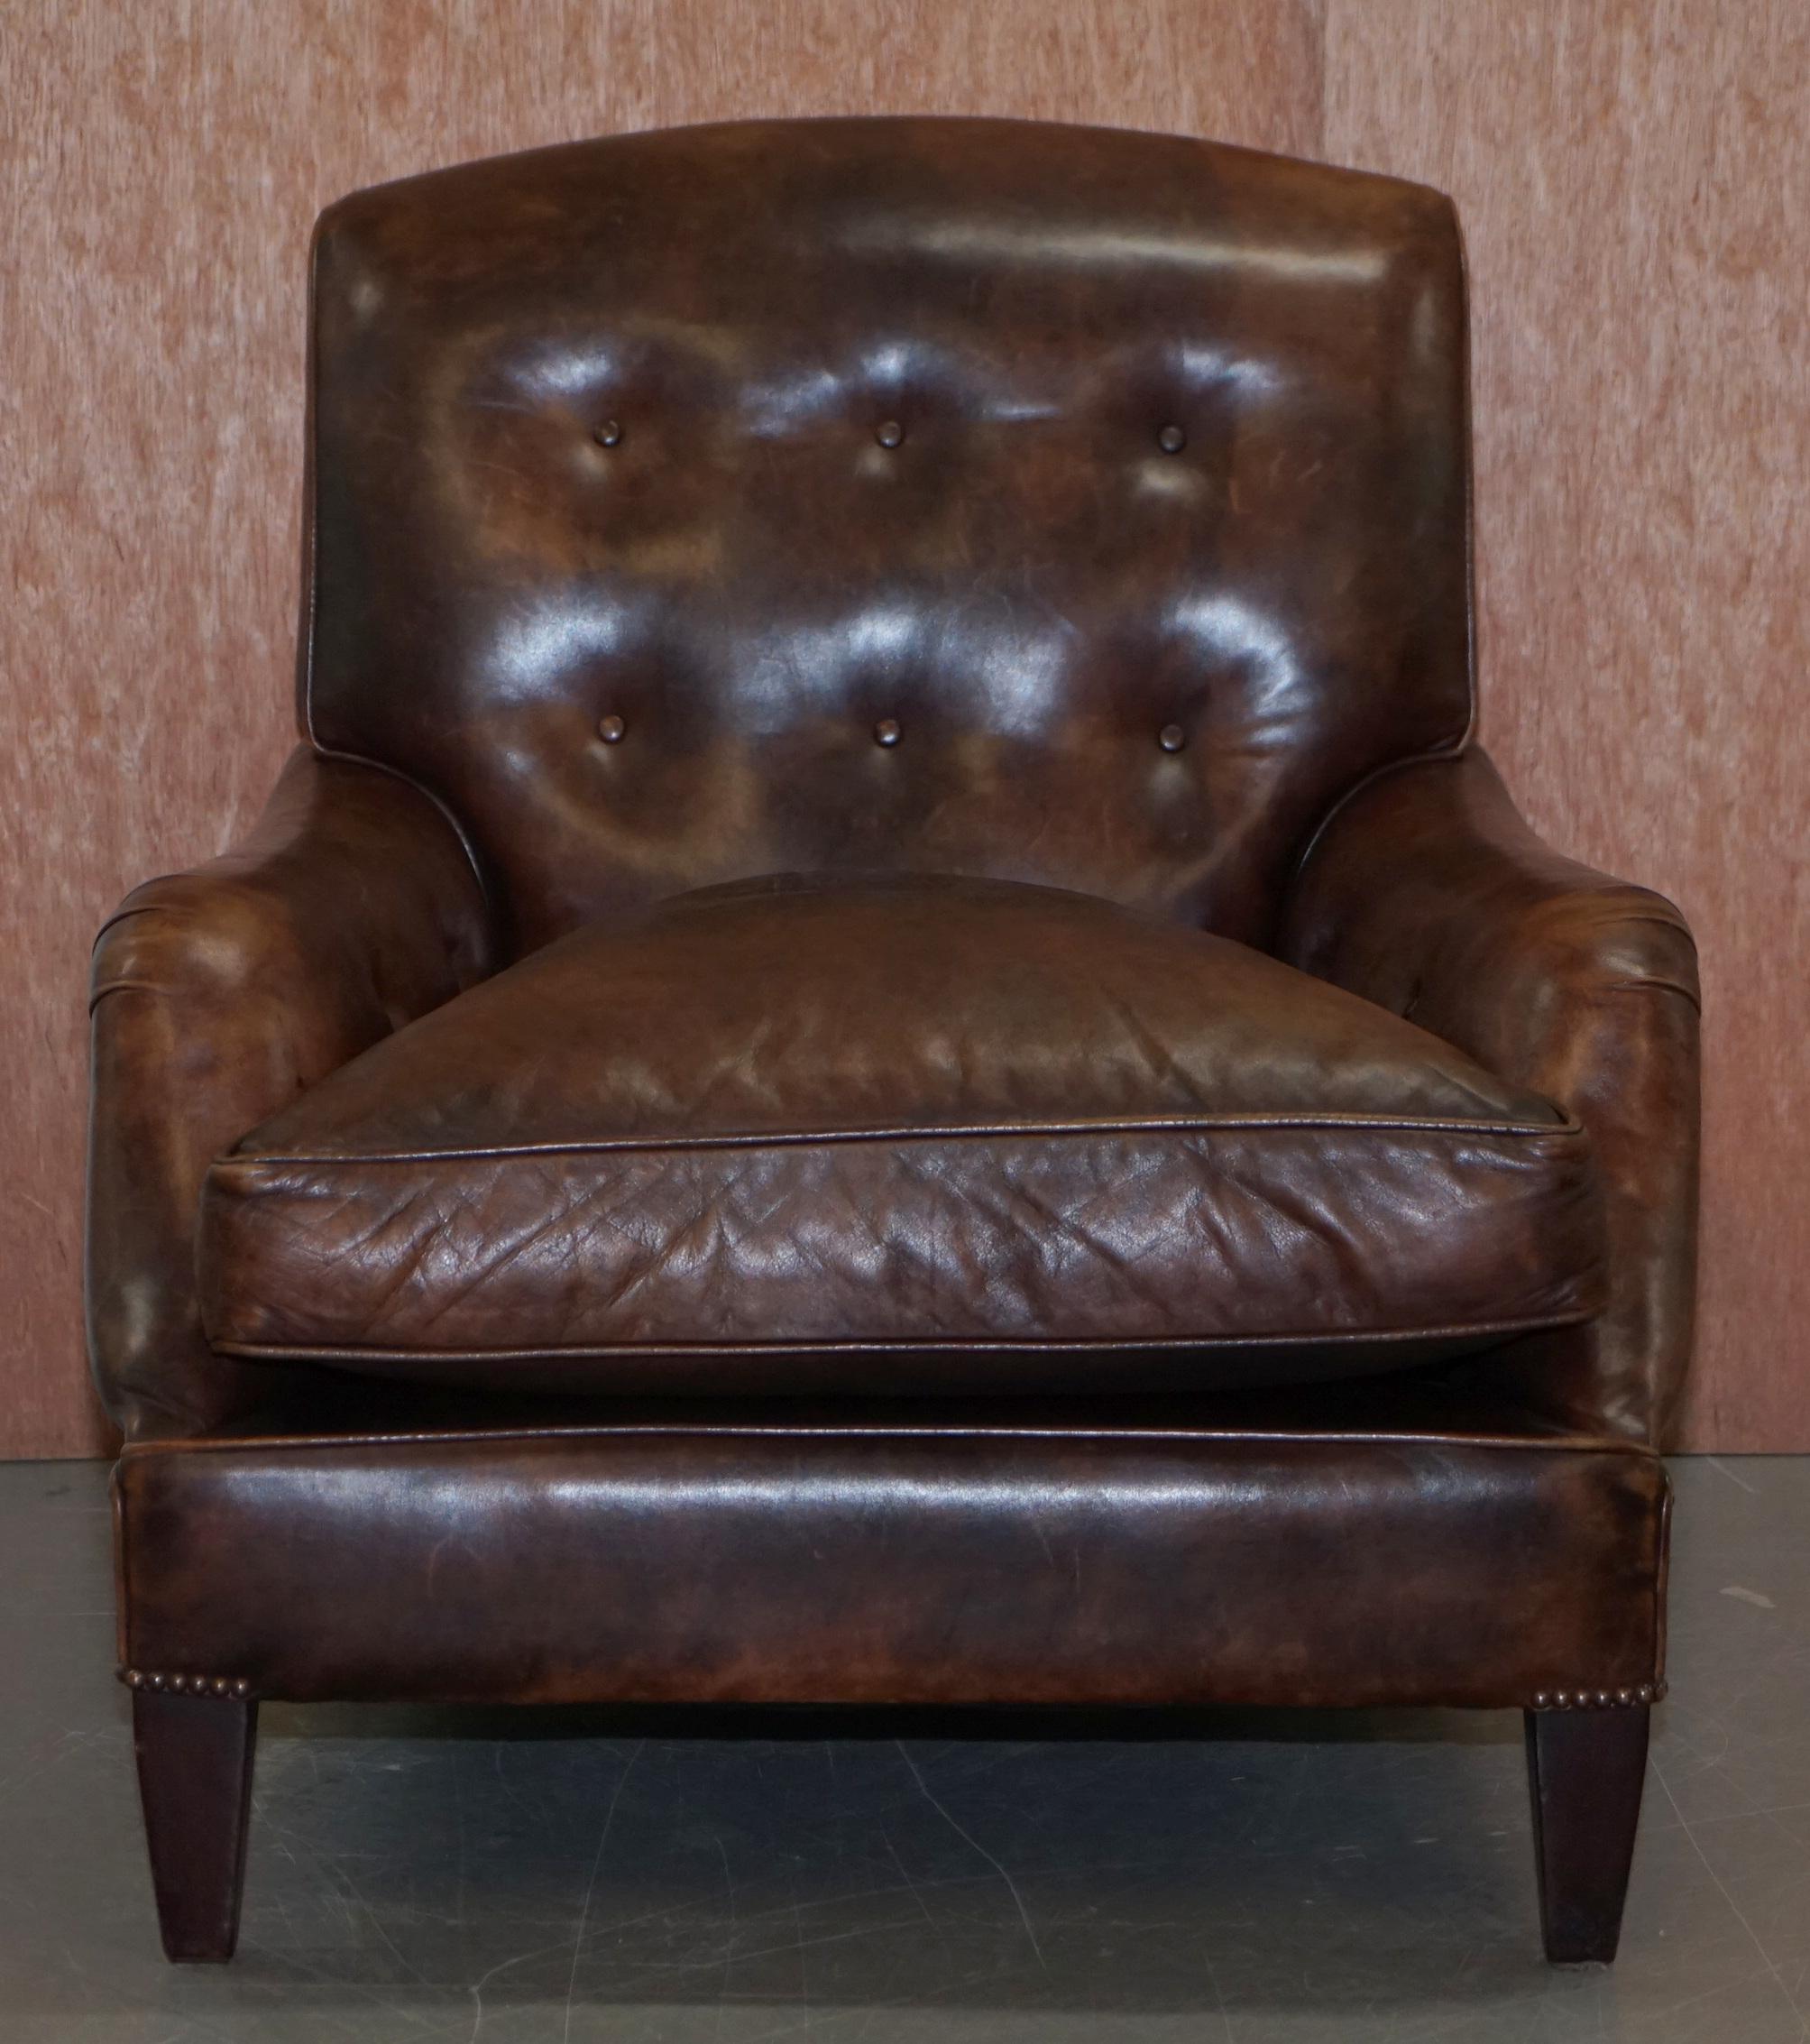 We are delighted to offer for sale this stunning handmade in England RRP £7000 George Smith aged brown leather Lennagan armchair

A very comfortable and well made club or library armchair, it has an elongated seat platform with a very comfortable